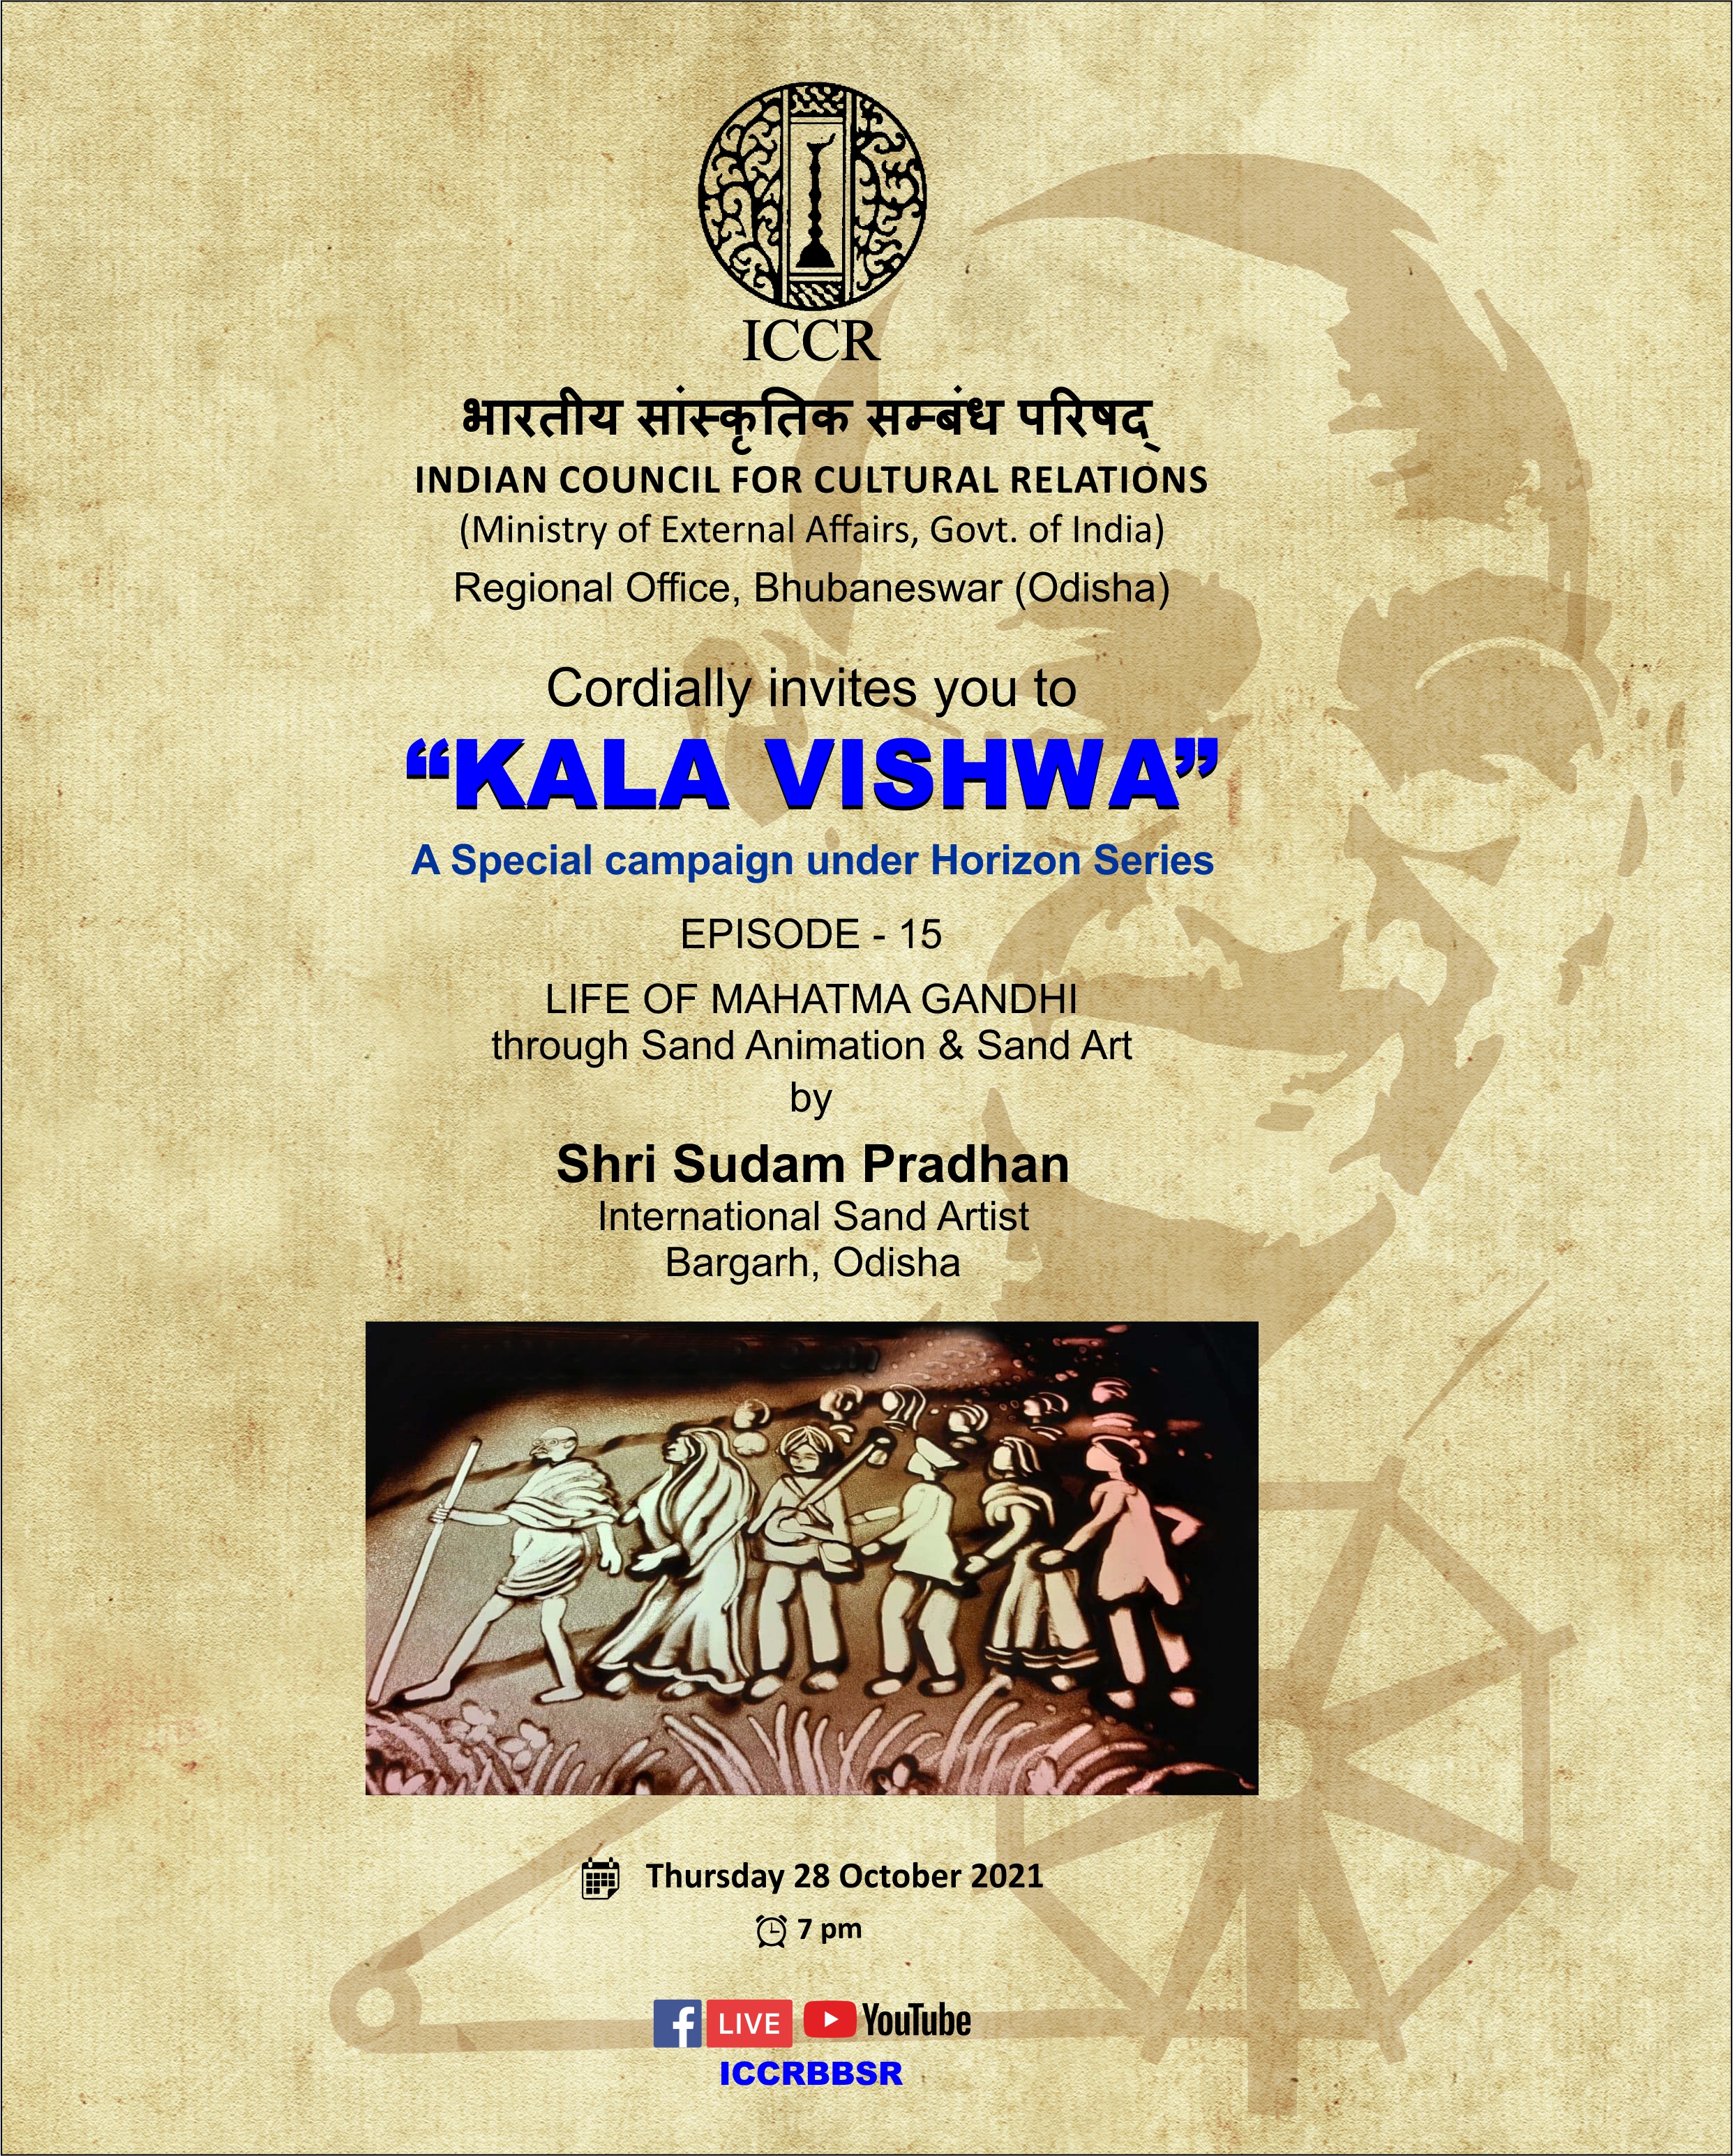 E-Invite : KALA VISHWA Campaign Episode # 15 under Horizon Series Thursday,  28 October 2021 at 7:00 pm | Official website of Indian Council for  Cultural Relations, Government of India